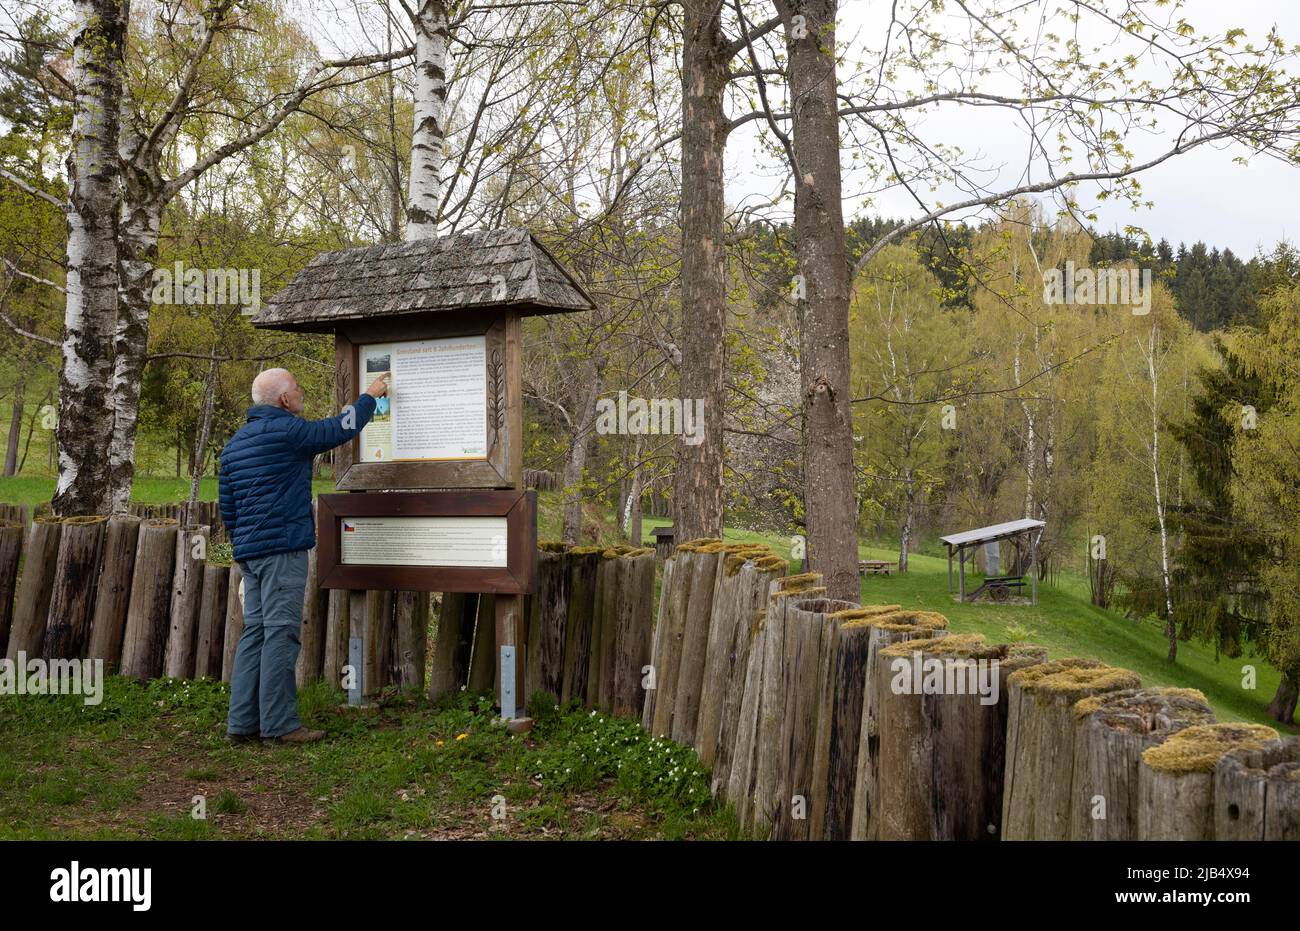 Open-air museum, hikers in front of an information board at the Schwedenschanze near Rading on the old Upper Austrian-Bohemian salt road, Bad Stock Photo